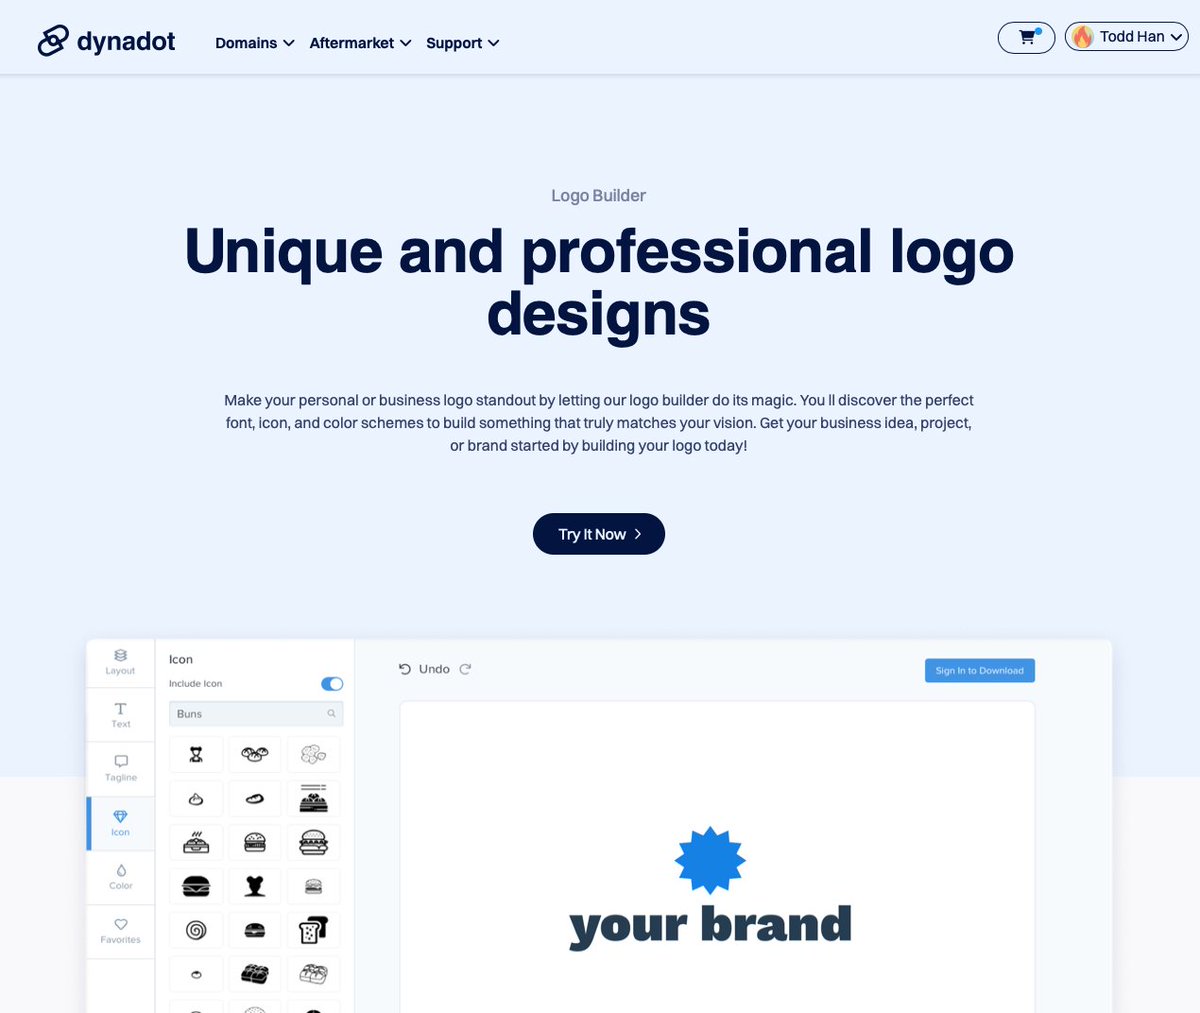 Our logo builder just launched. Comes free with every domain name.